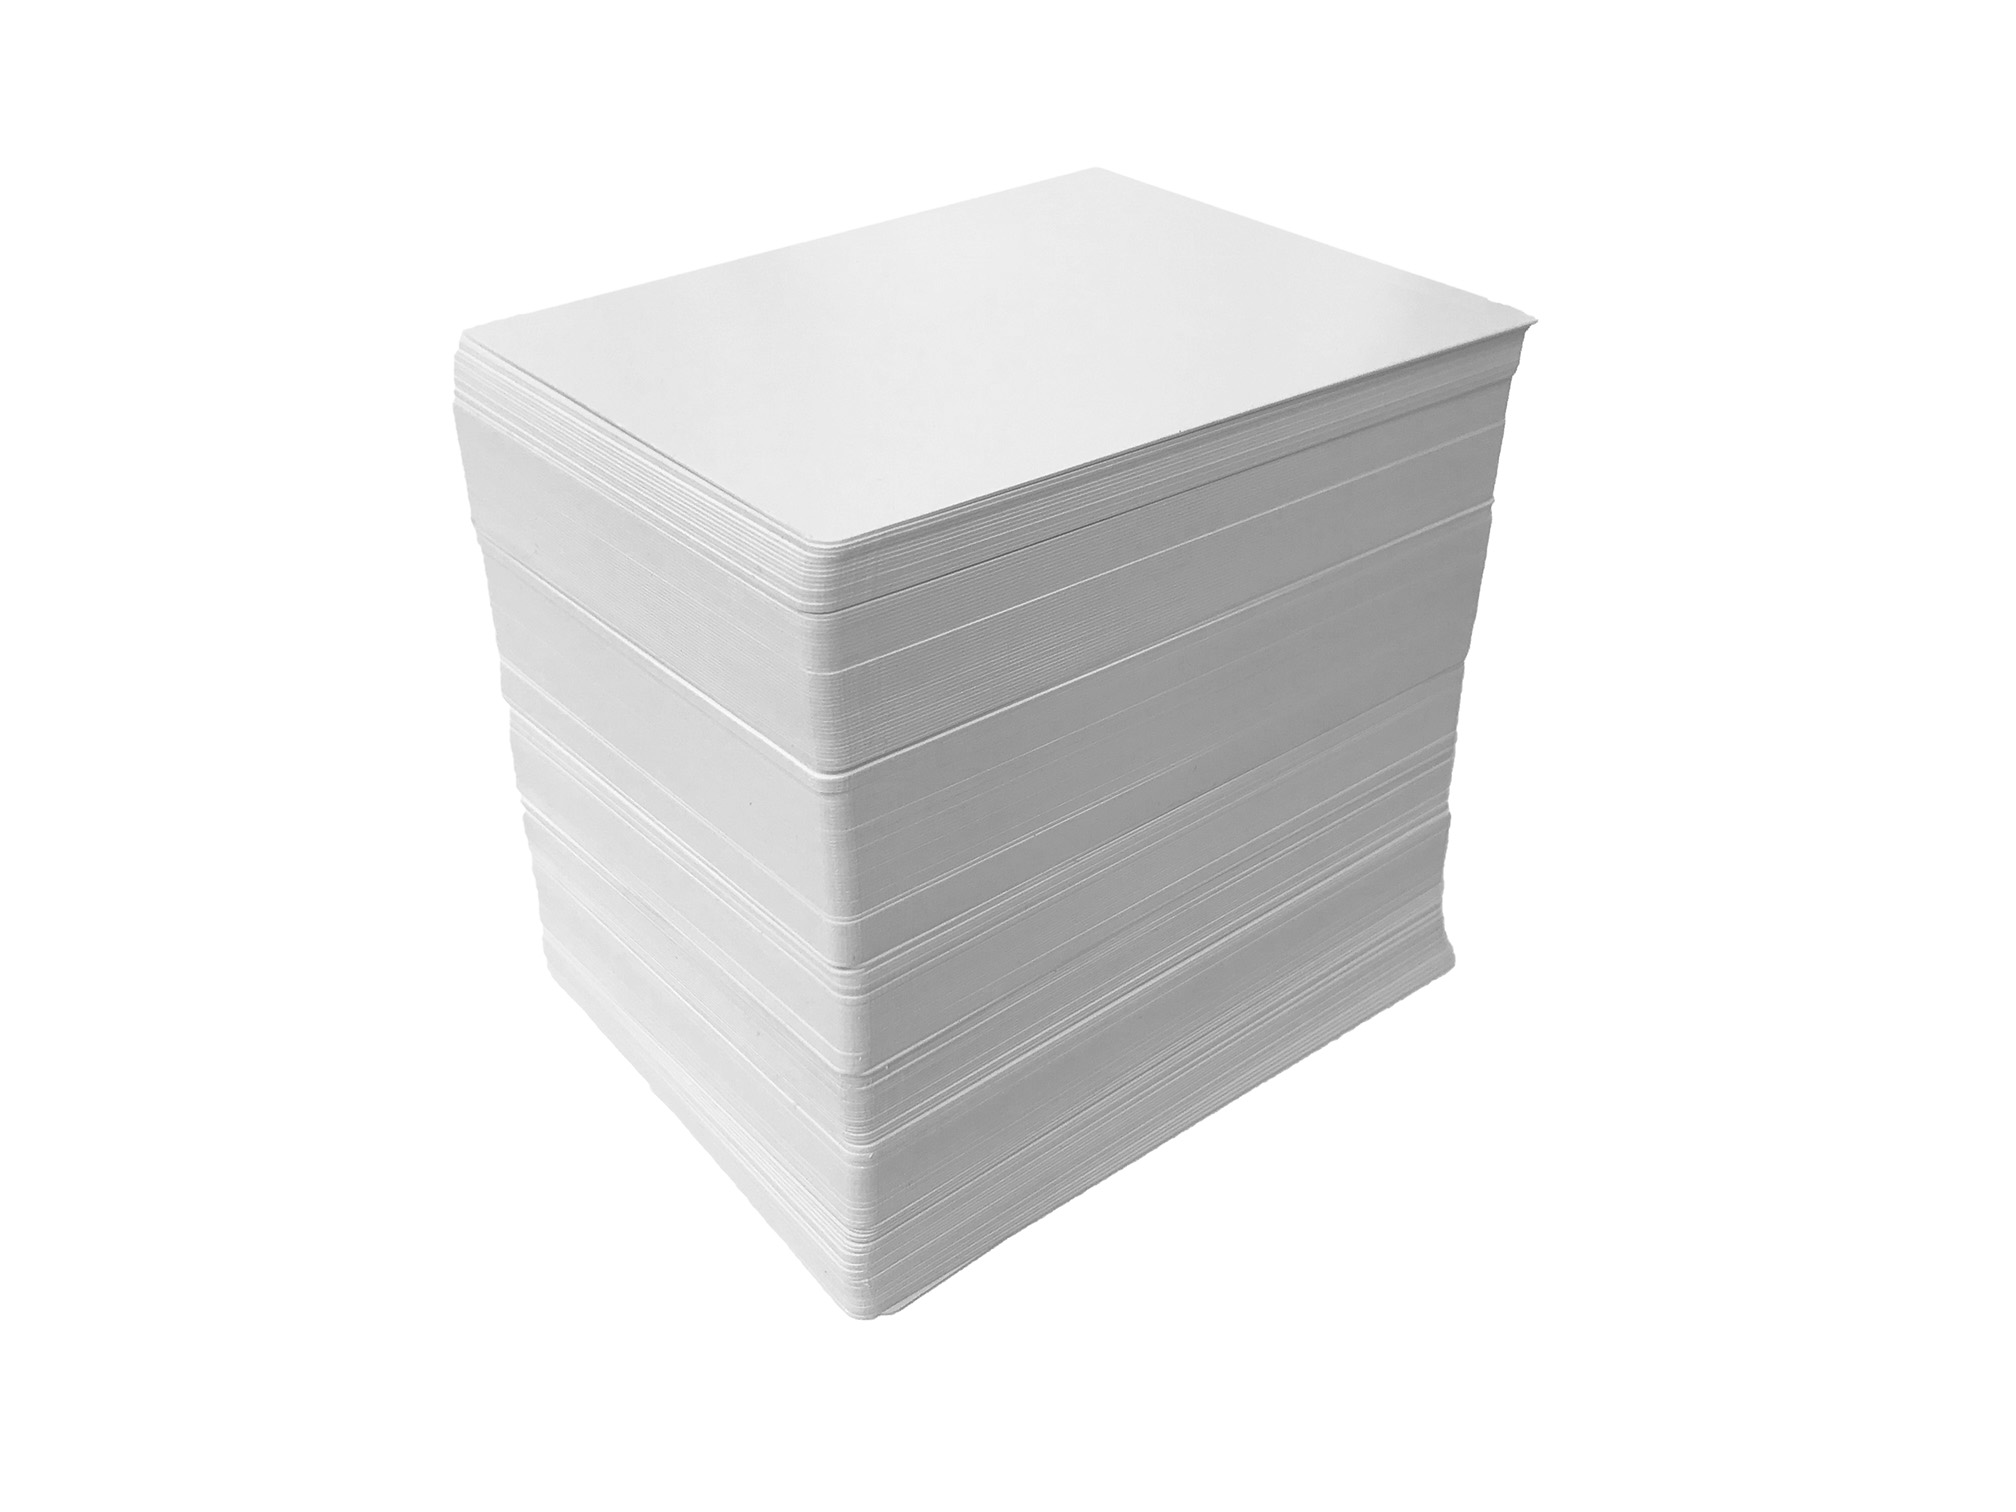 Blank Playing Cards (Poker Size & Aqueous Finish) 2.5 x 3.5, 180 Blank  Cards, Flash Cards, Board Game Cards 